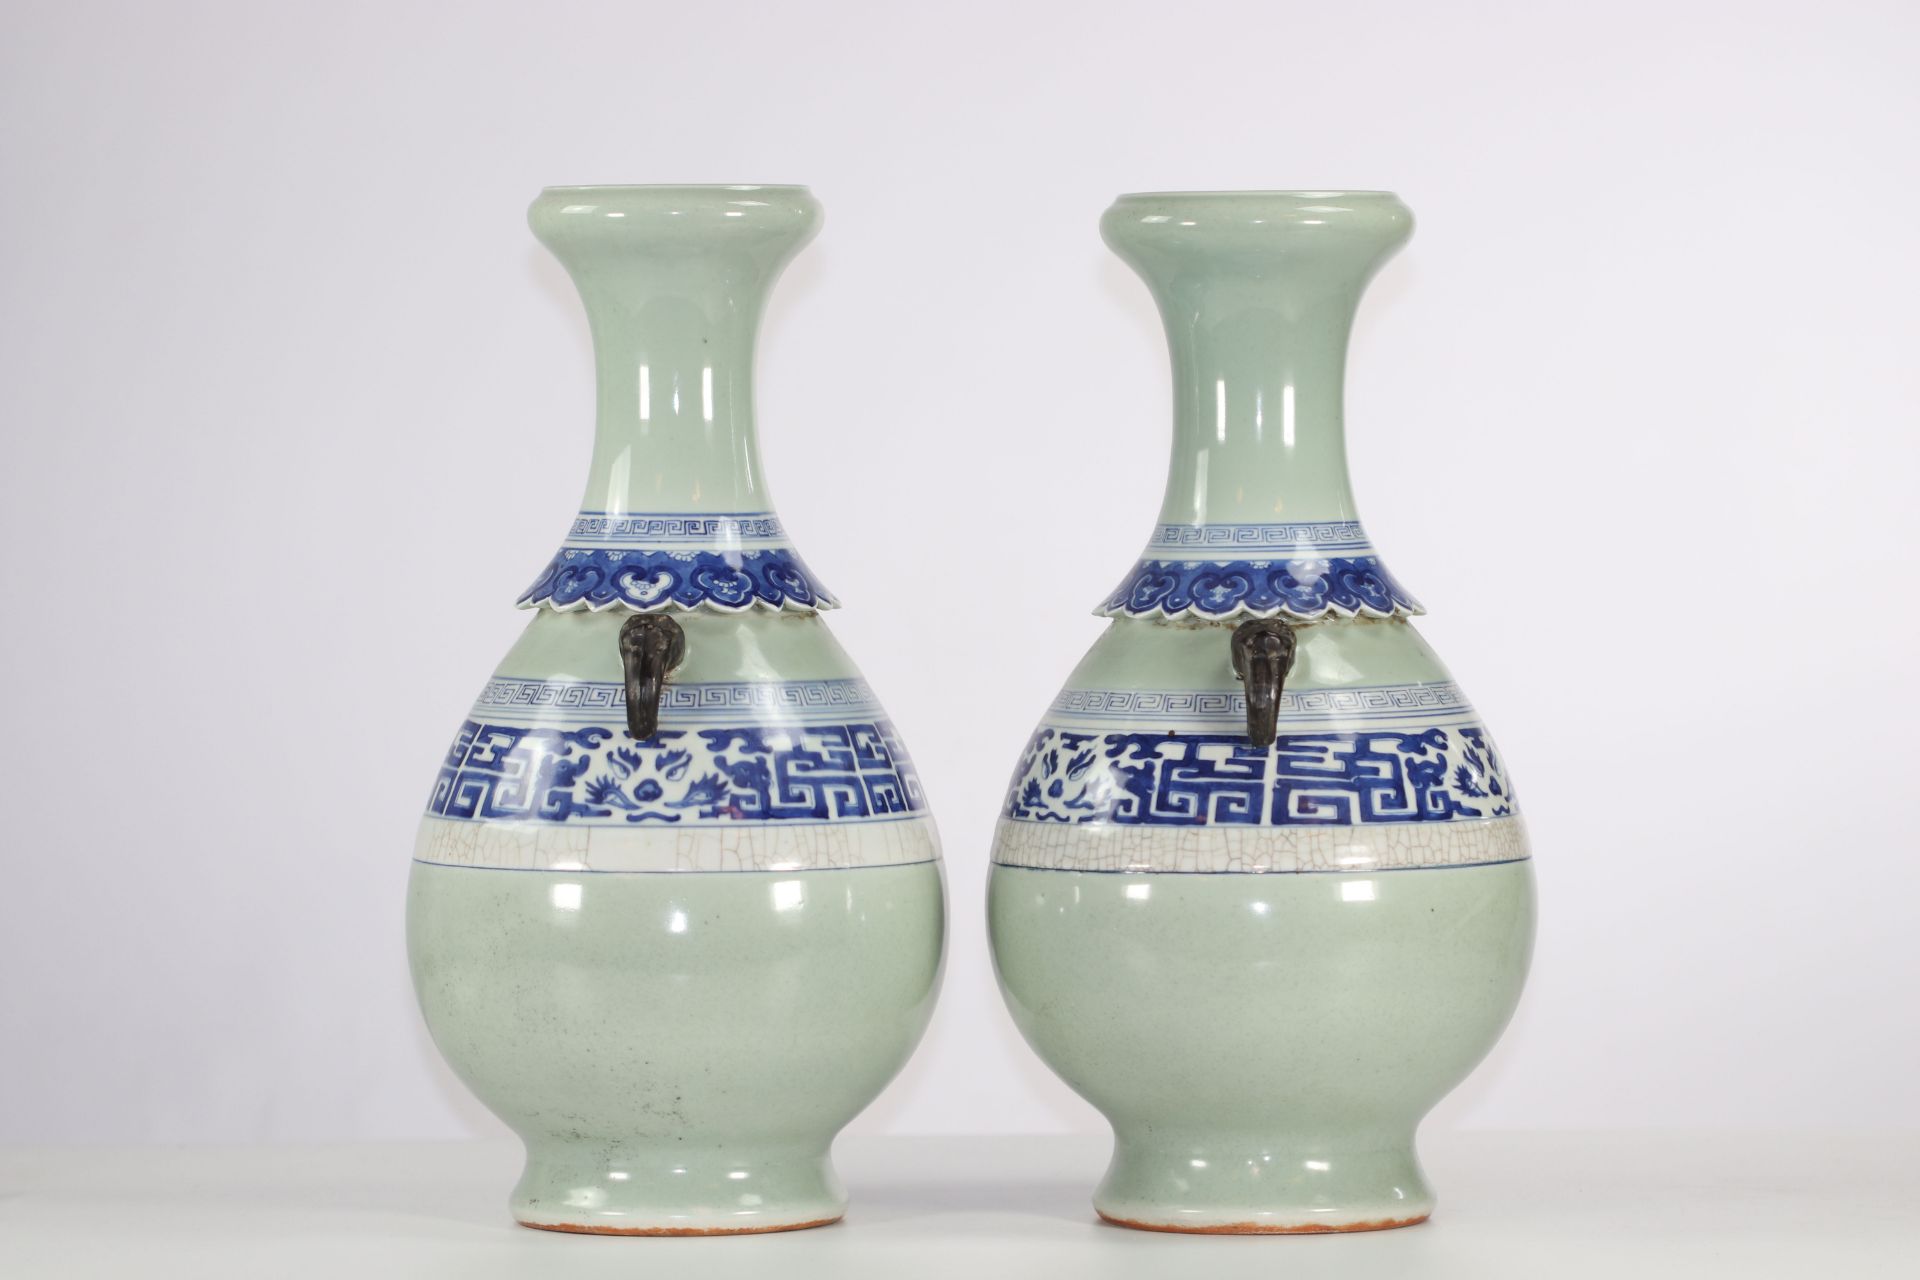 Pair of Nanjing porcelain vases, late 19th century China. - Image 4 of 6